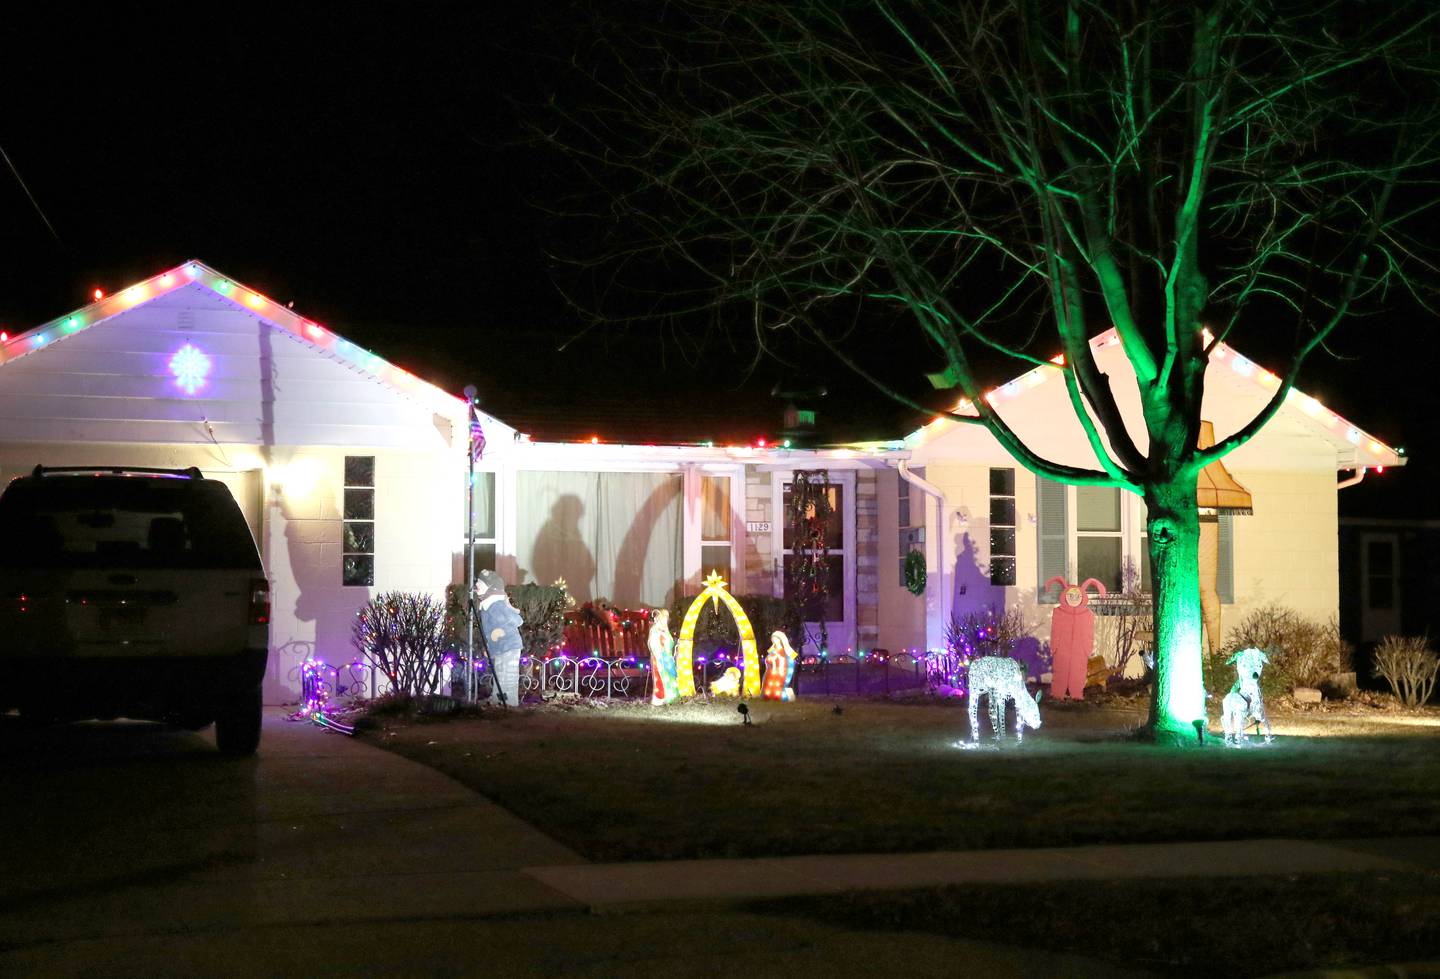 Many homes in DeKalb County were all decked out for the holidays like this one at 1129 North 14th Street in DeKalb which was one of the award winners in the DeKalb Park District's Holiday House Decorating Contest.